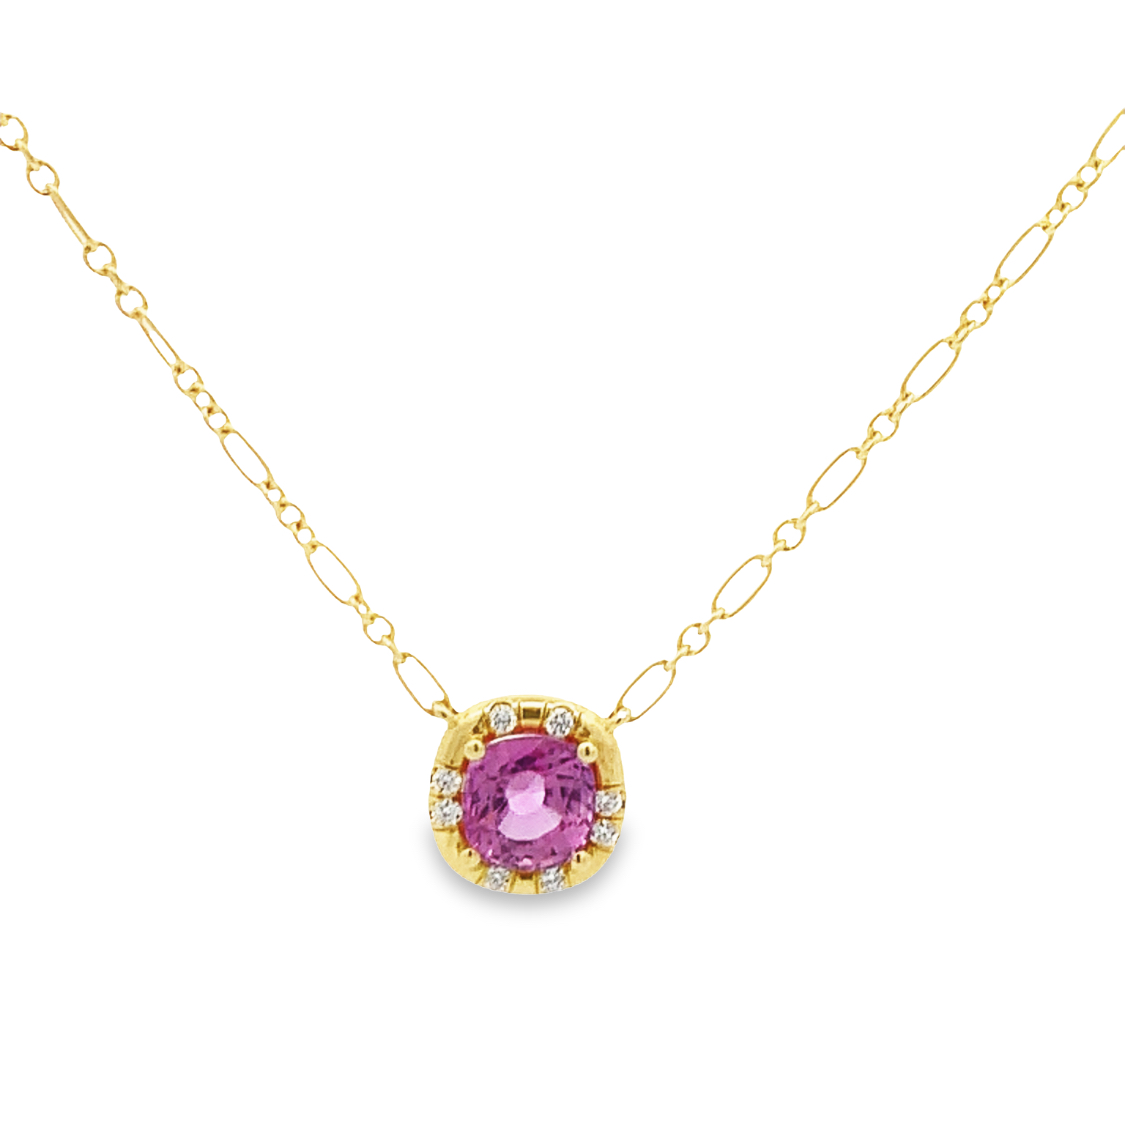 Lauren K 18K Yellow Gold Pink Sapphire and Diamond Necklace with 1 Cushion Cut Pink Sapphire